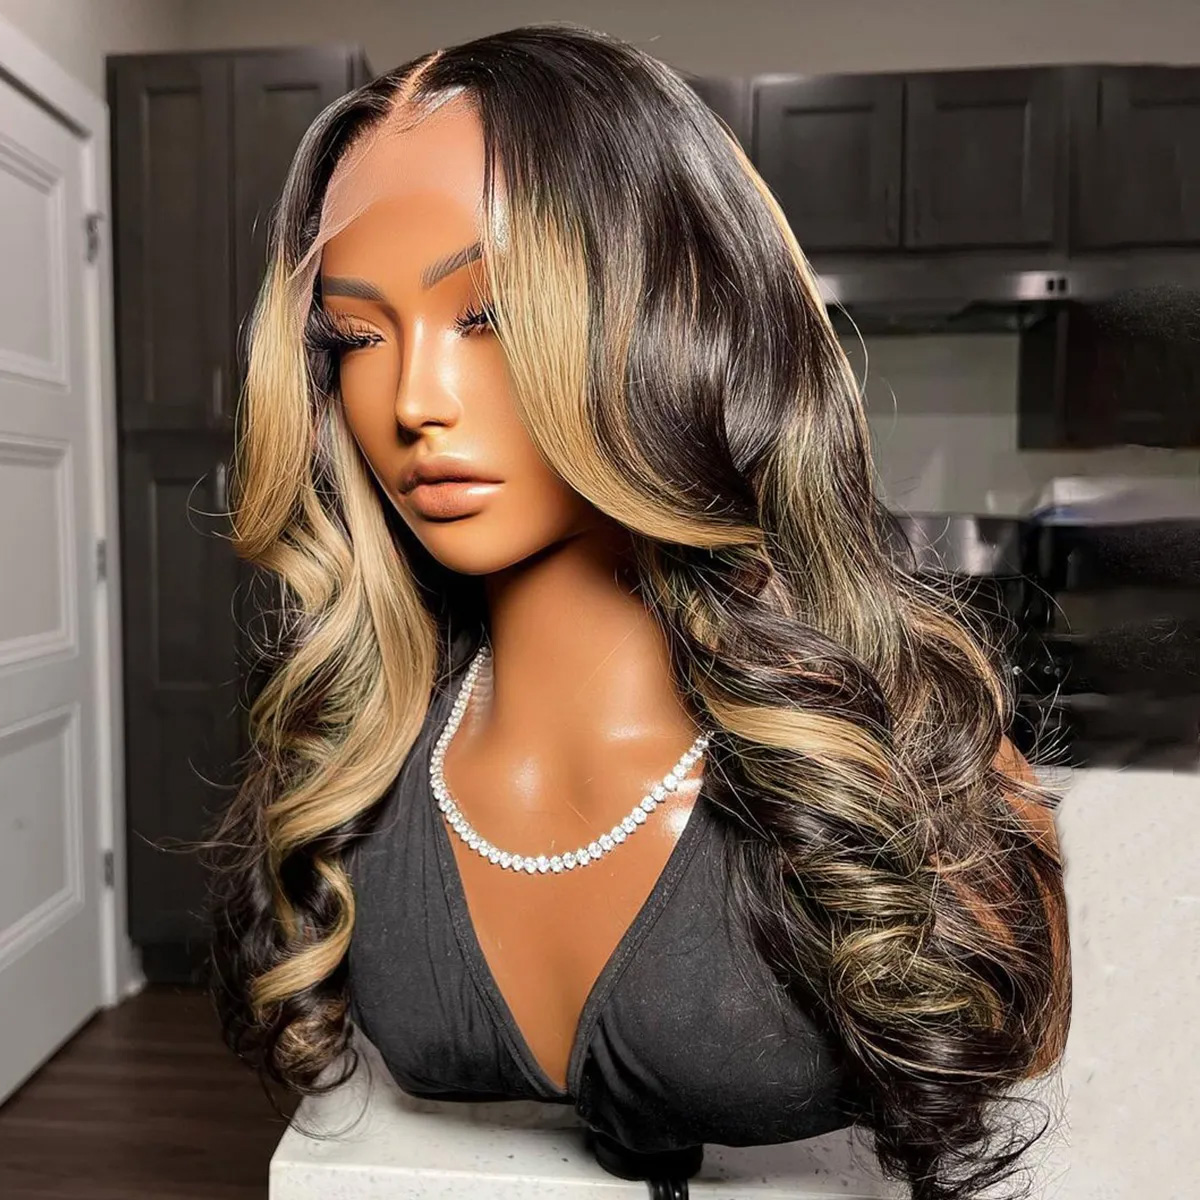 Starshow-hair-highlight-loose-body-lace-wig